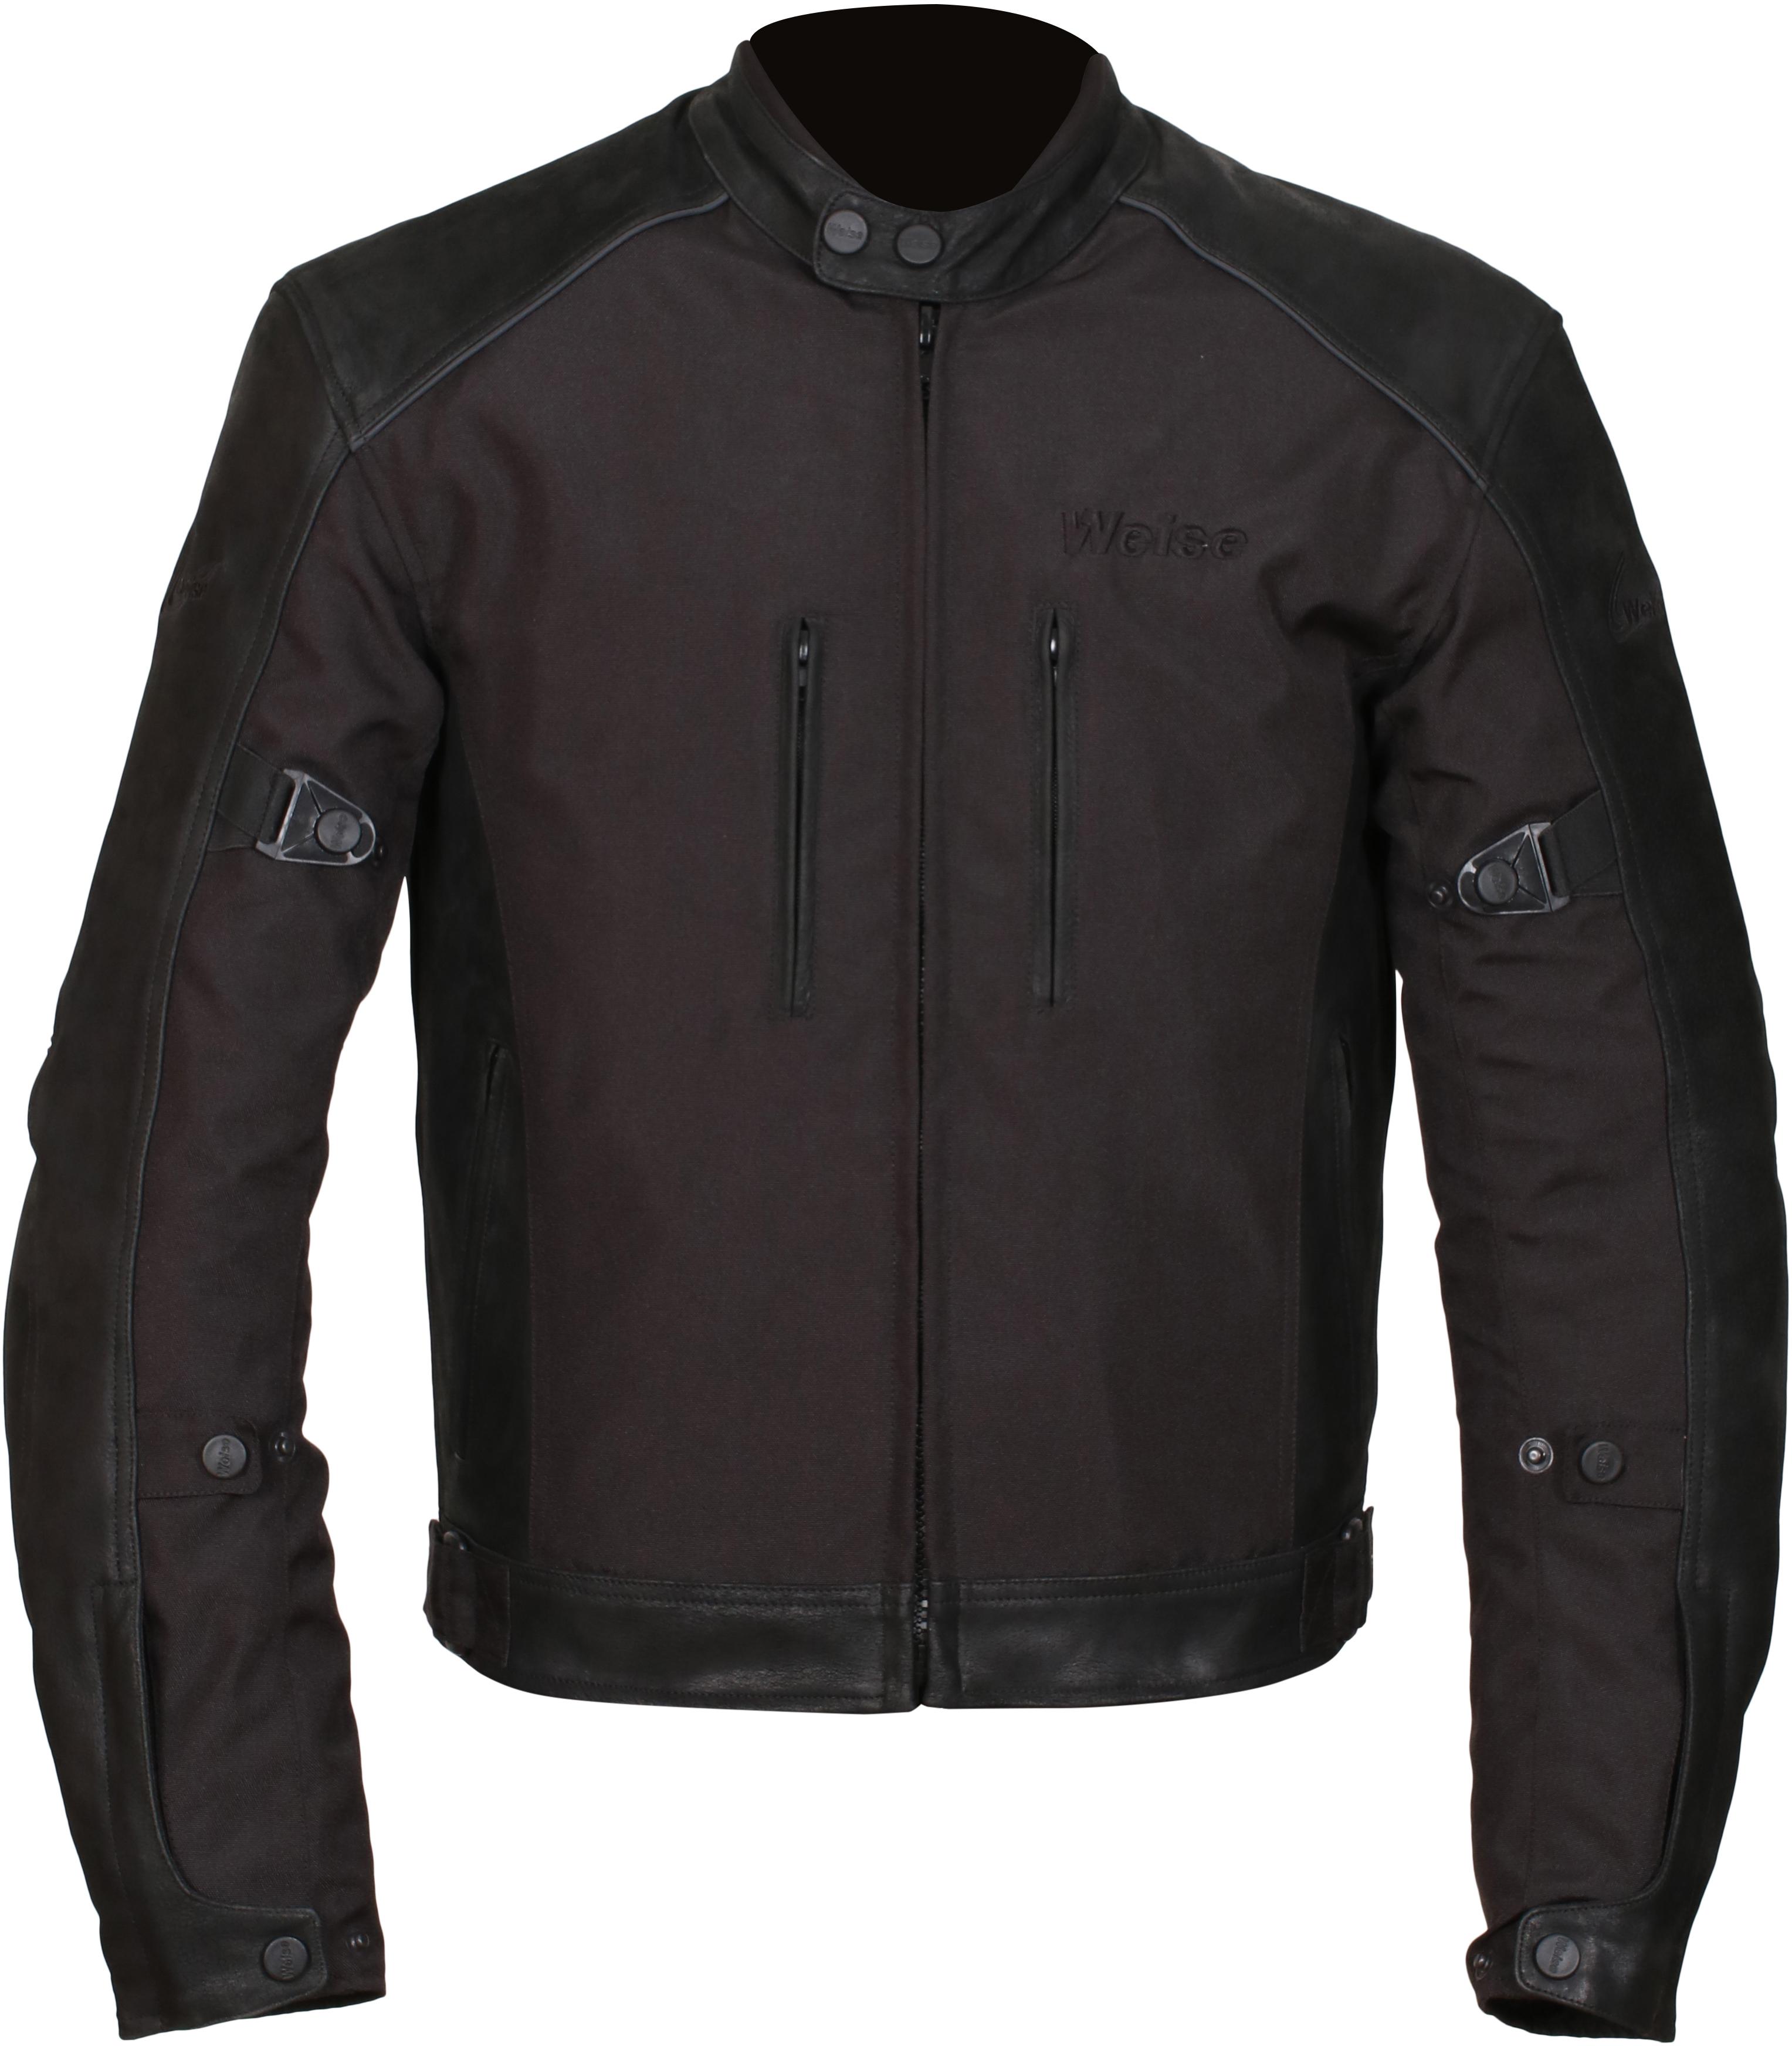 Weise Mission Motorcycle Jacket - Black, L